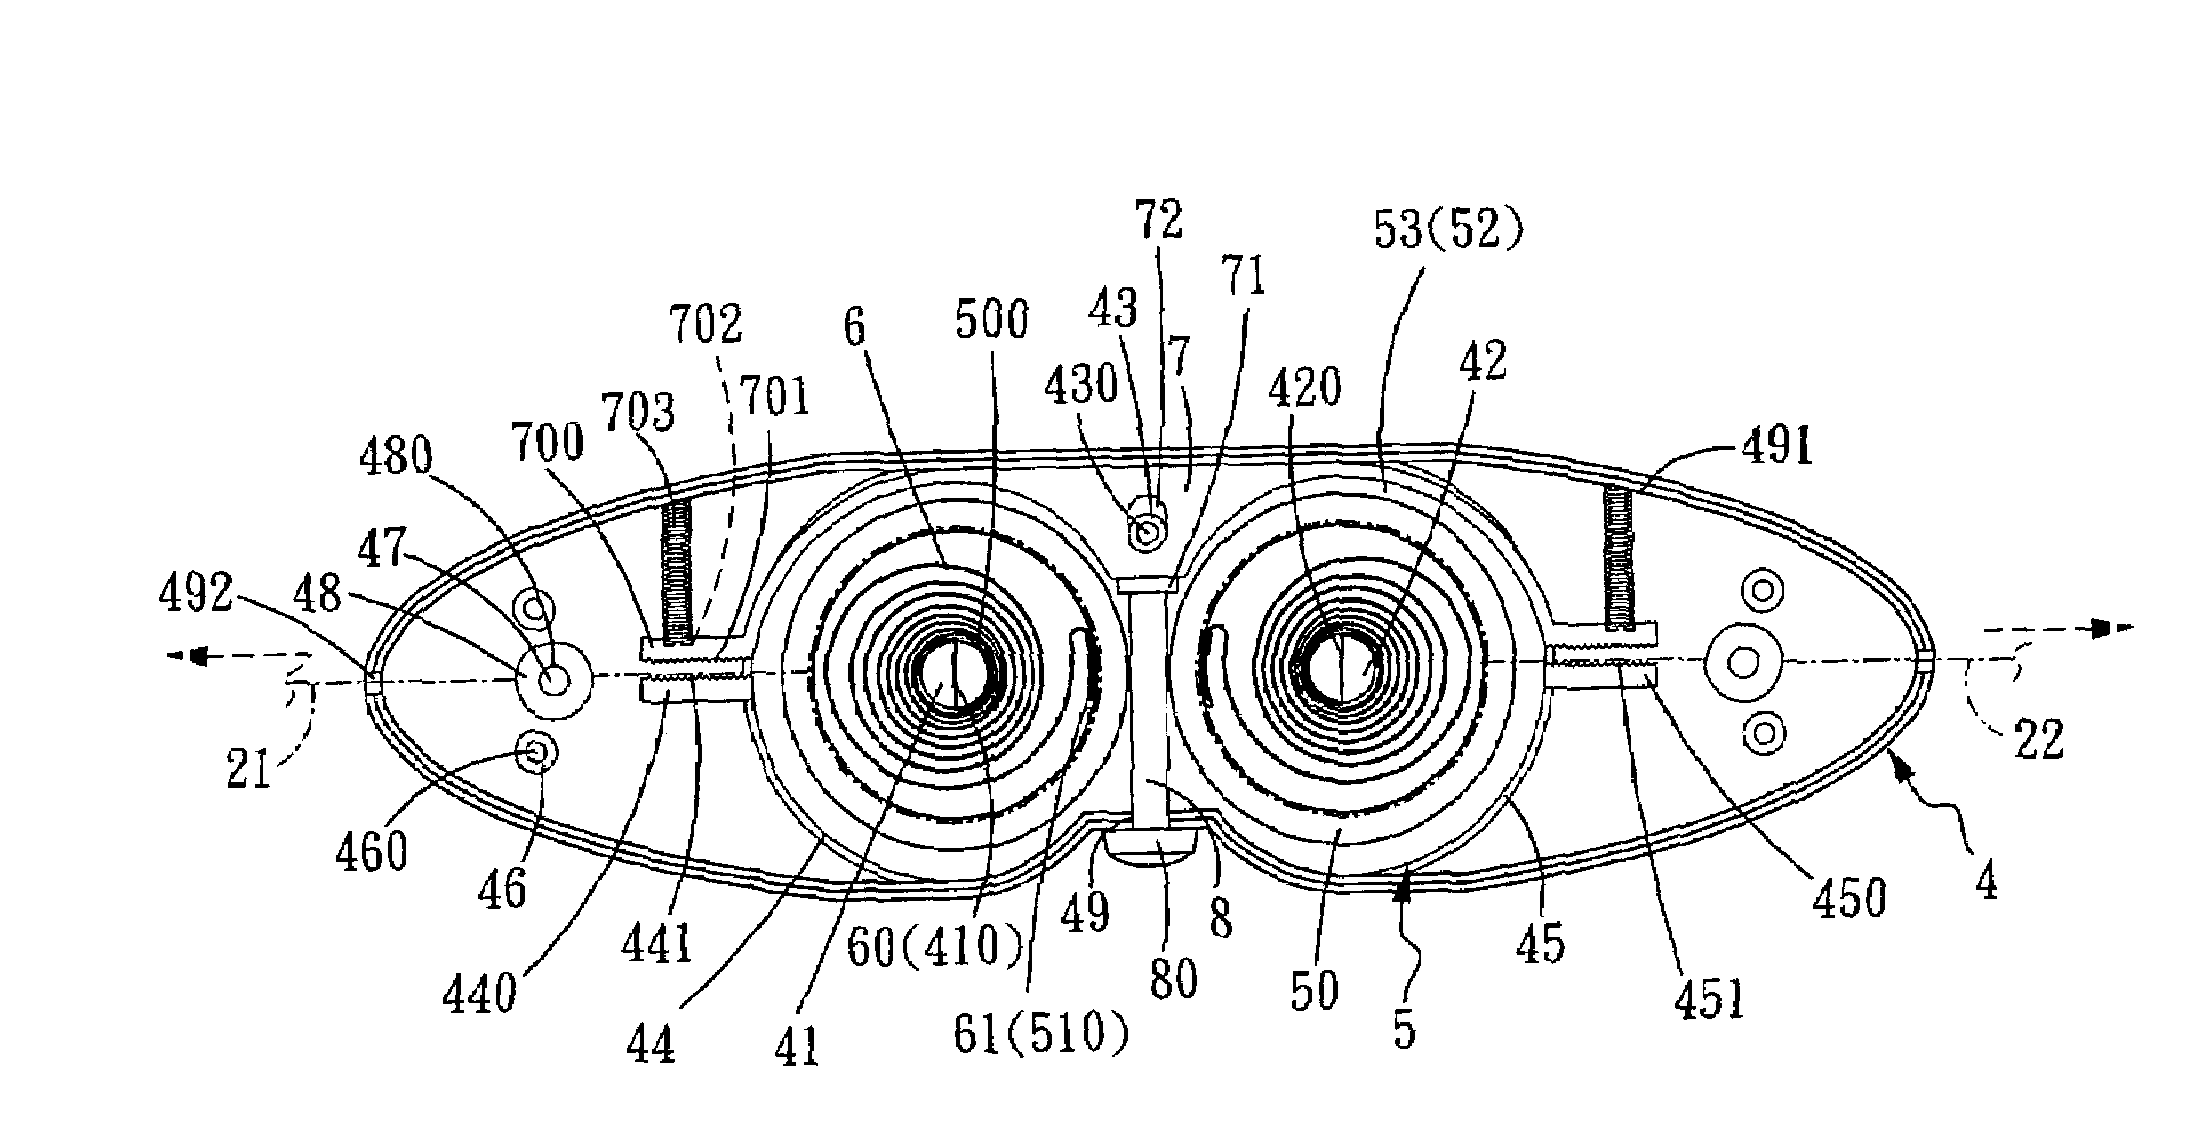 Pulling cord winding apparatus for window shades